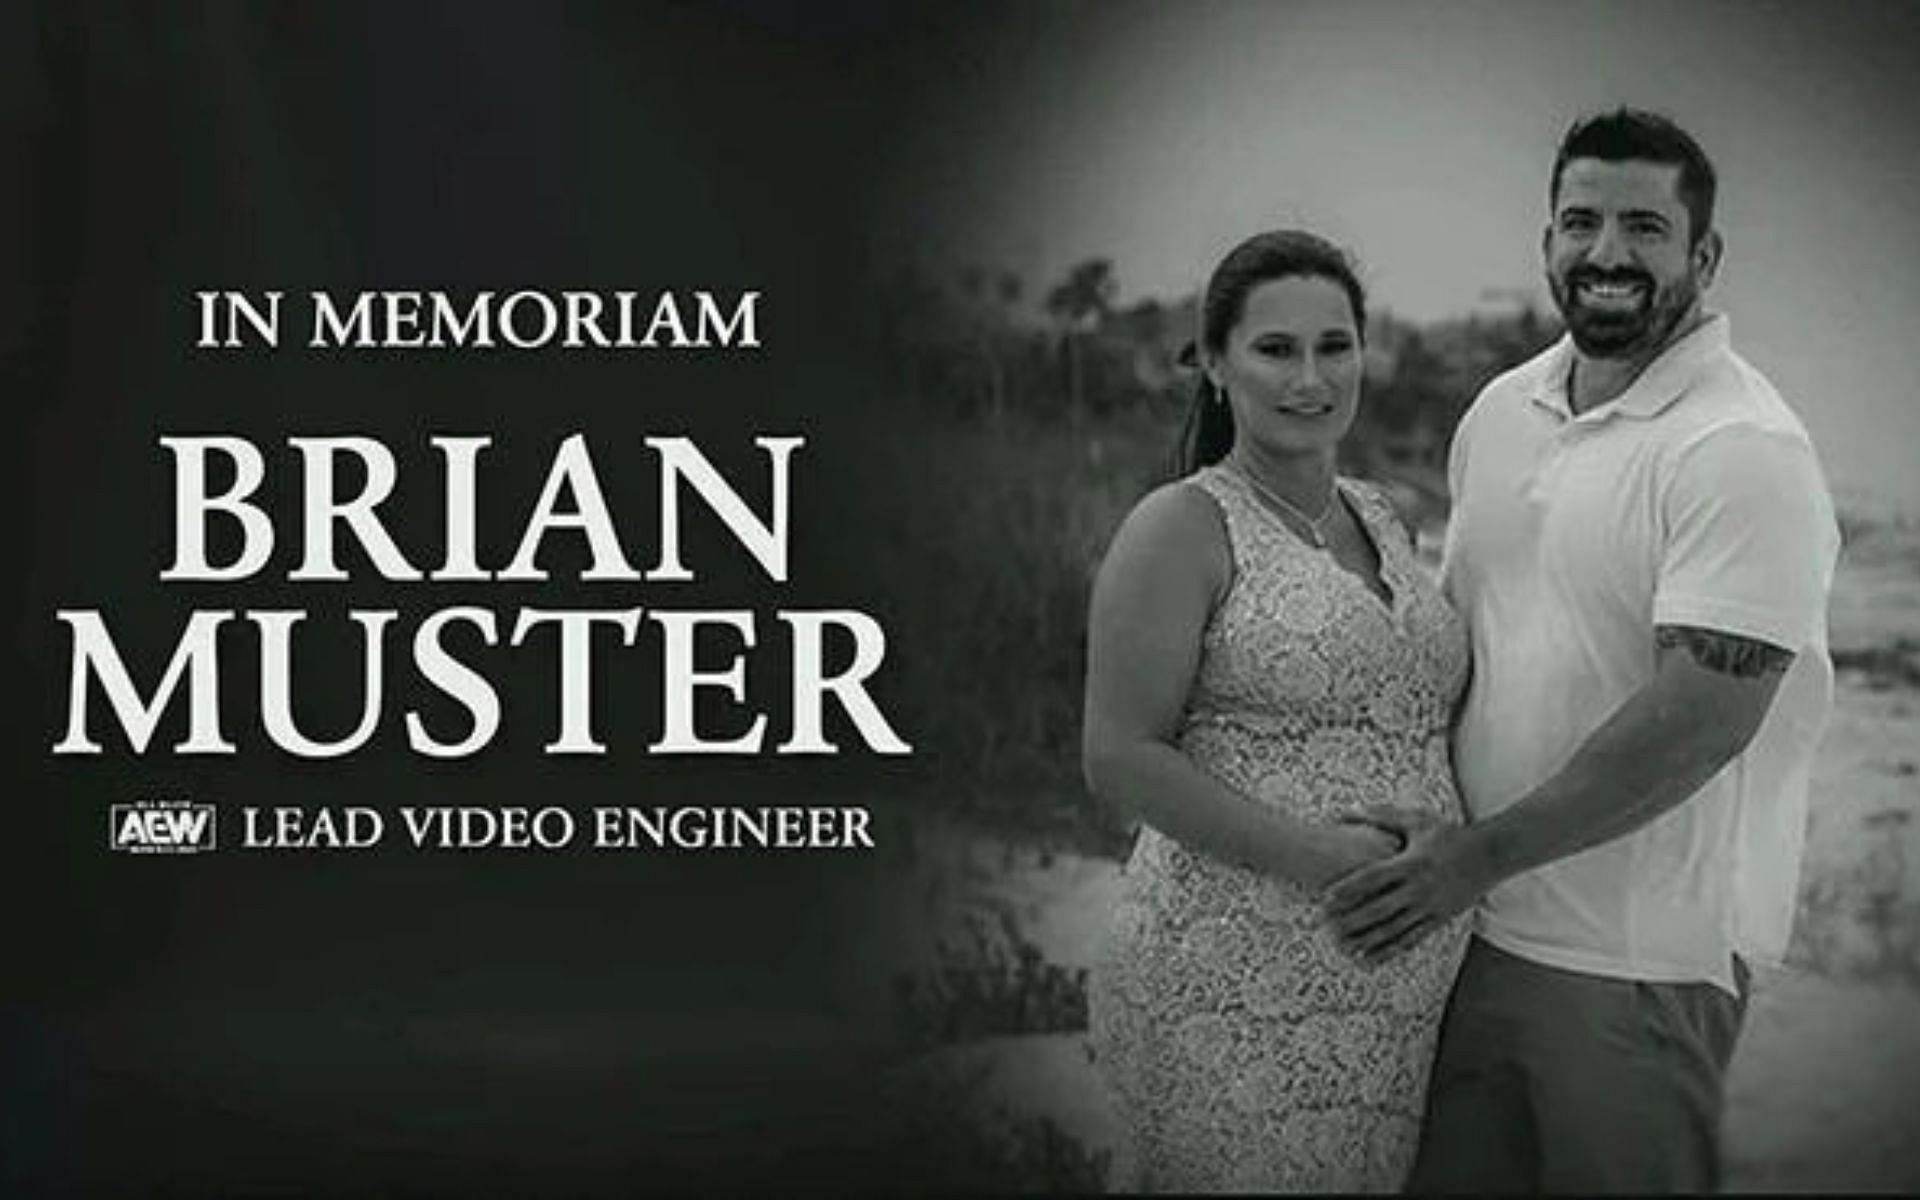 Brian Muster leaves behind a fianc&eacute; and two children